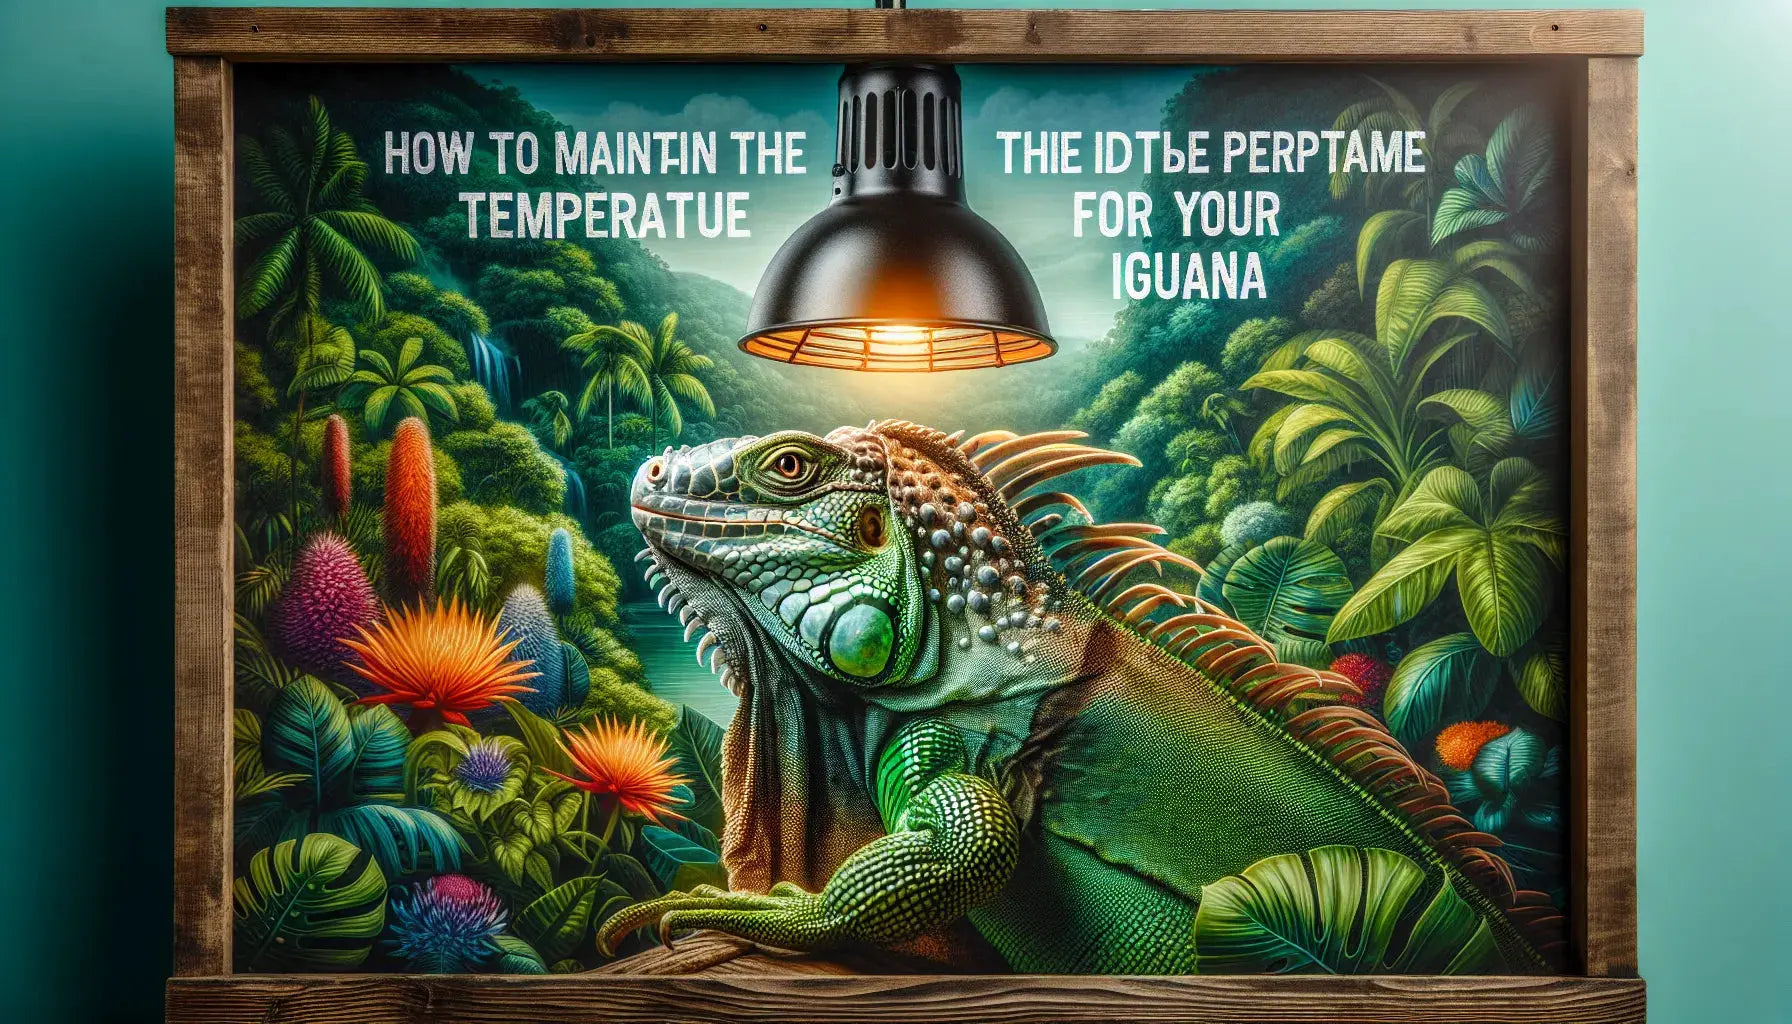 How to Maintain the Ideal Temperature for Your Iguana